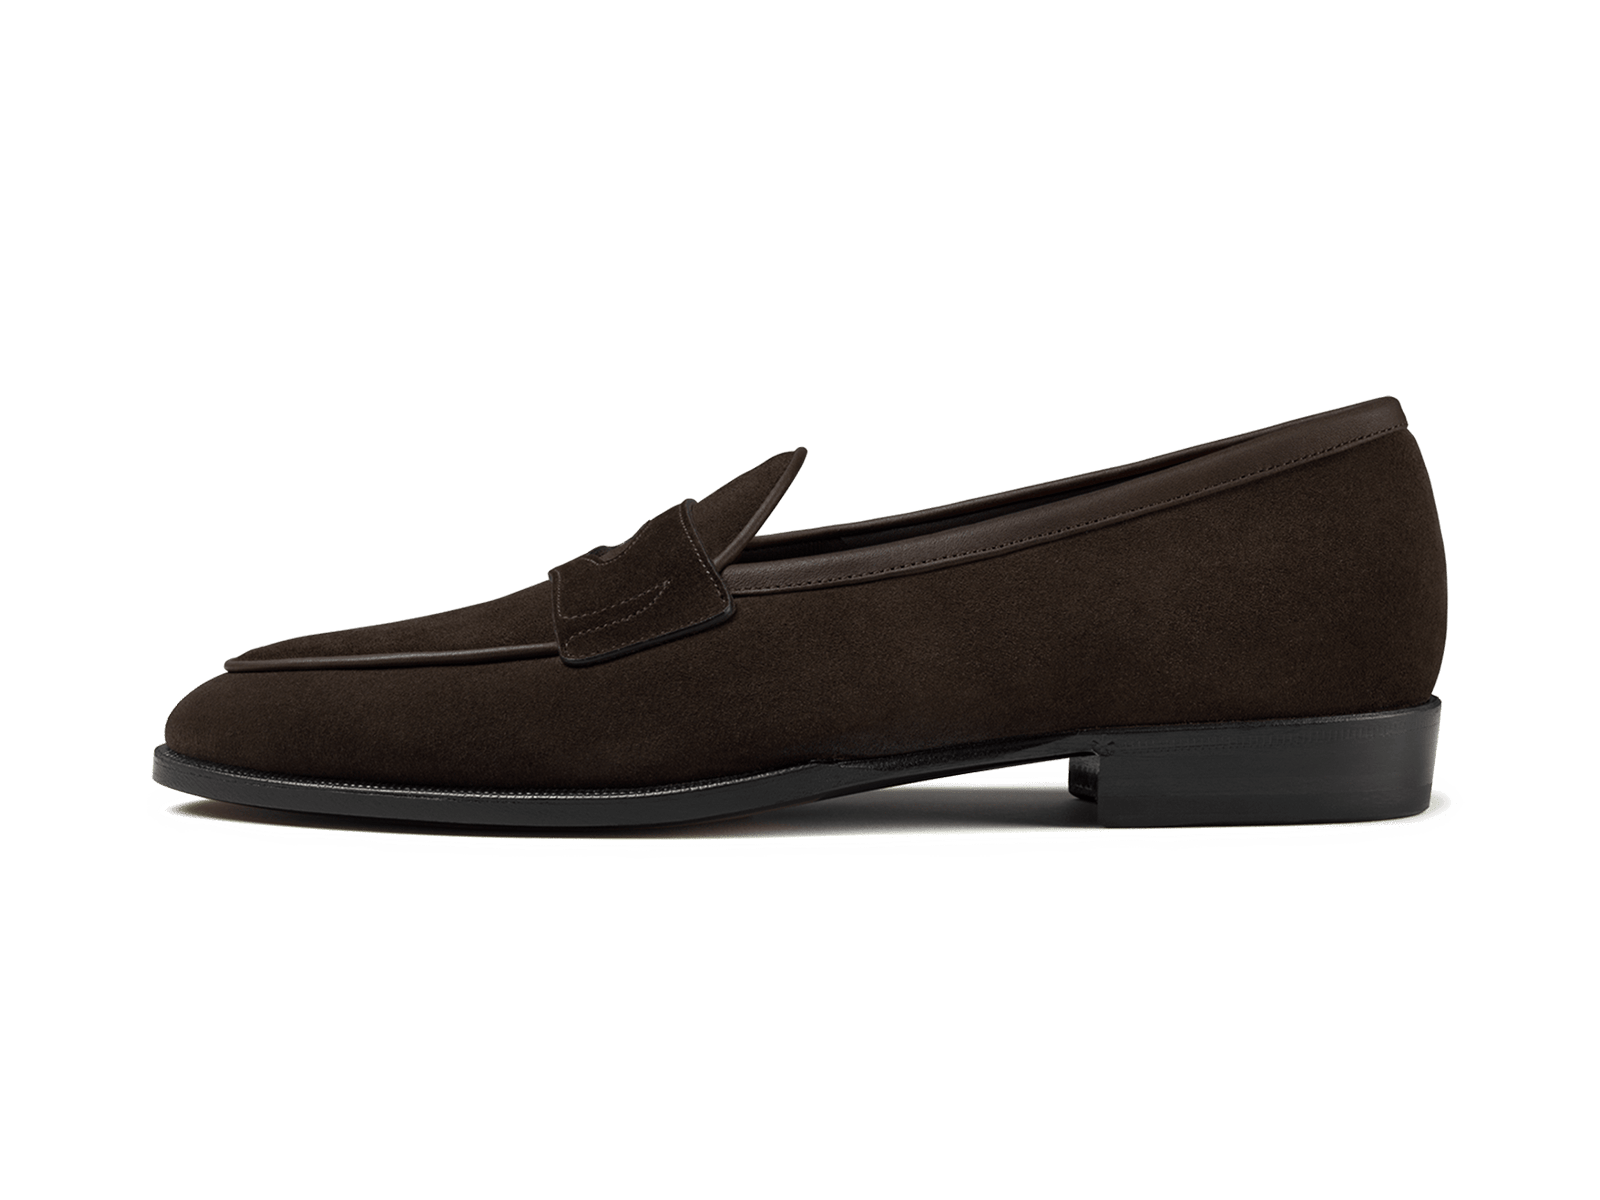 Grand Fenelon Penny Loafers in Dark Brown Noble Suede